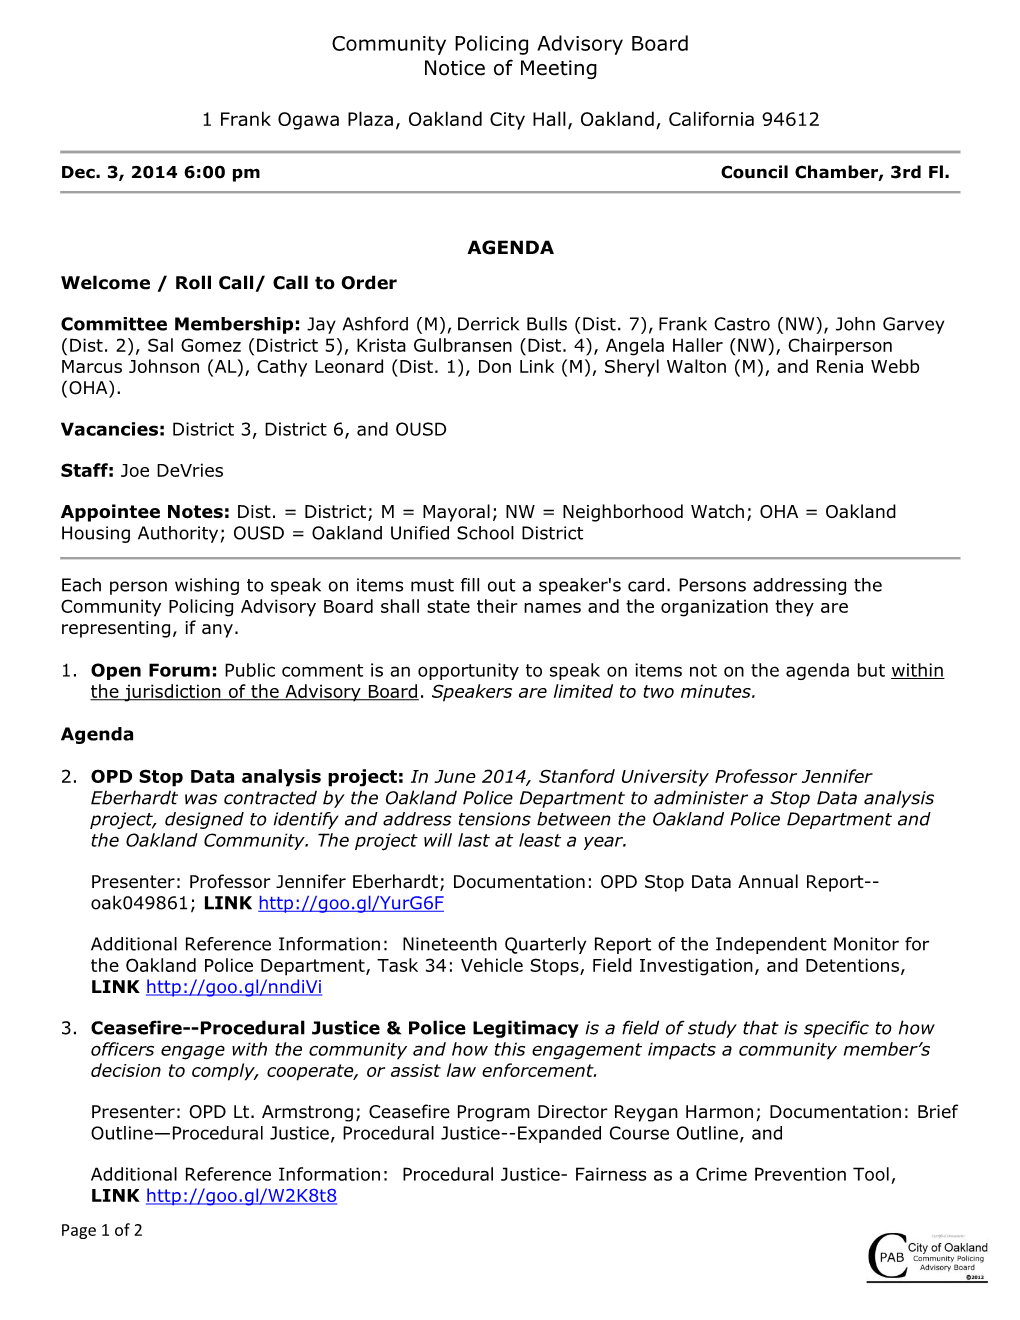 Community Policing Advisory Board Notice of Meeting